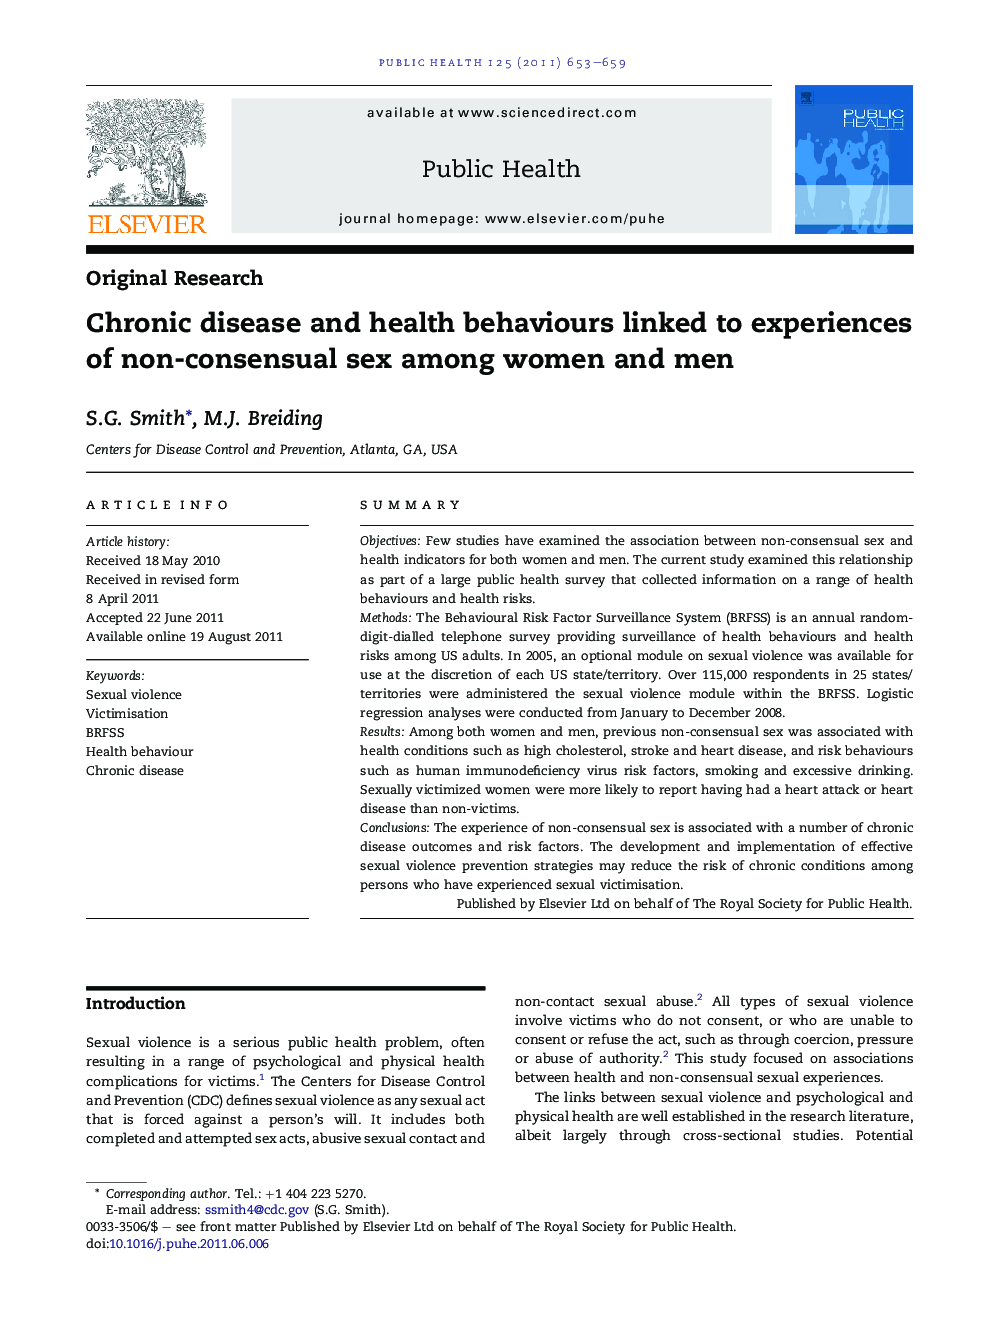 Chronic disease and health behaviours linked to experiences of non-consensual sex among women and men